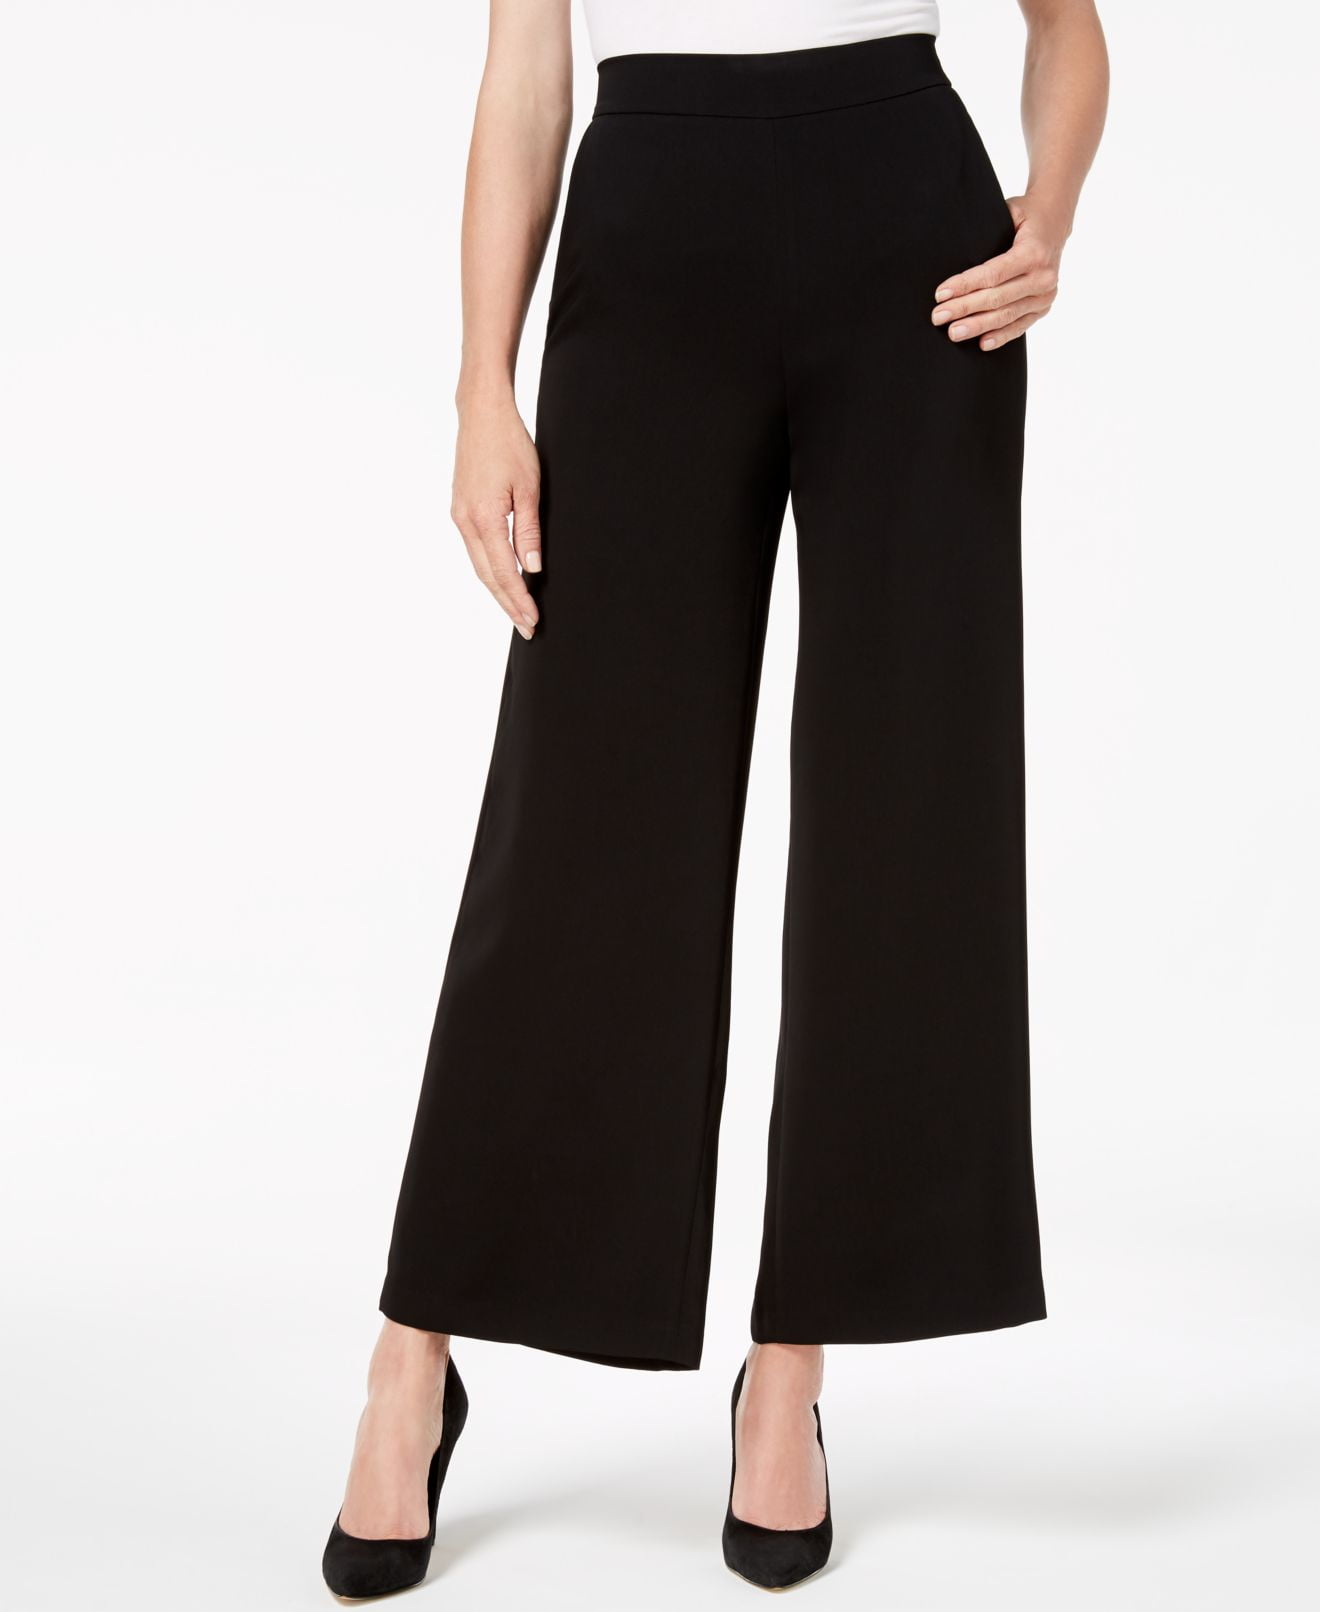 Nine West - Womens Pants Black Wide Leg Pull On Two Pocket Stretch $79 ...